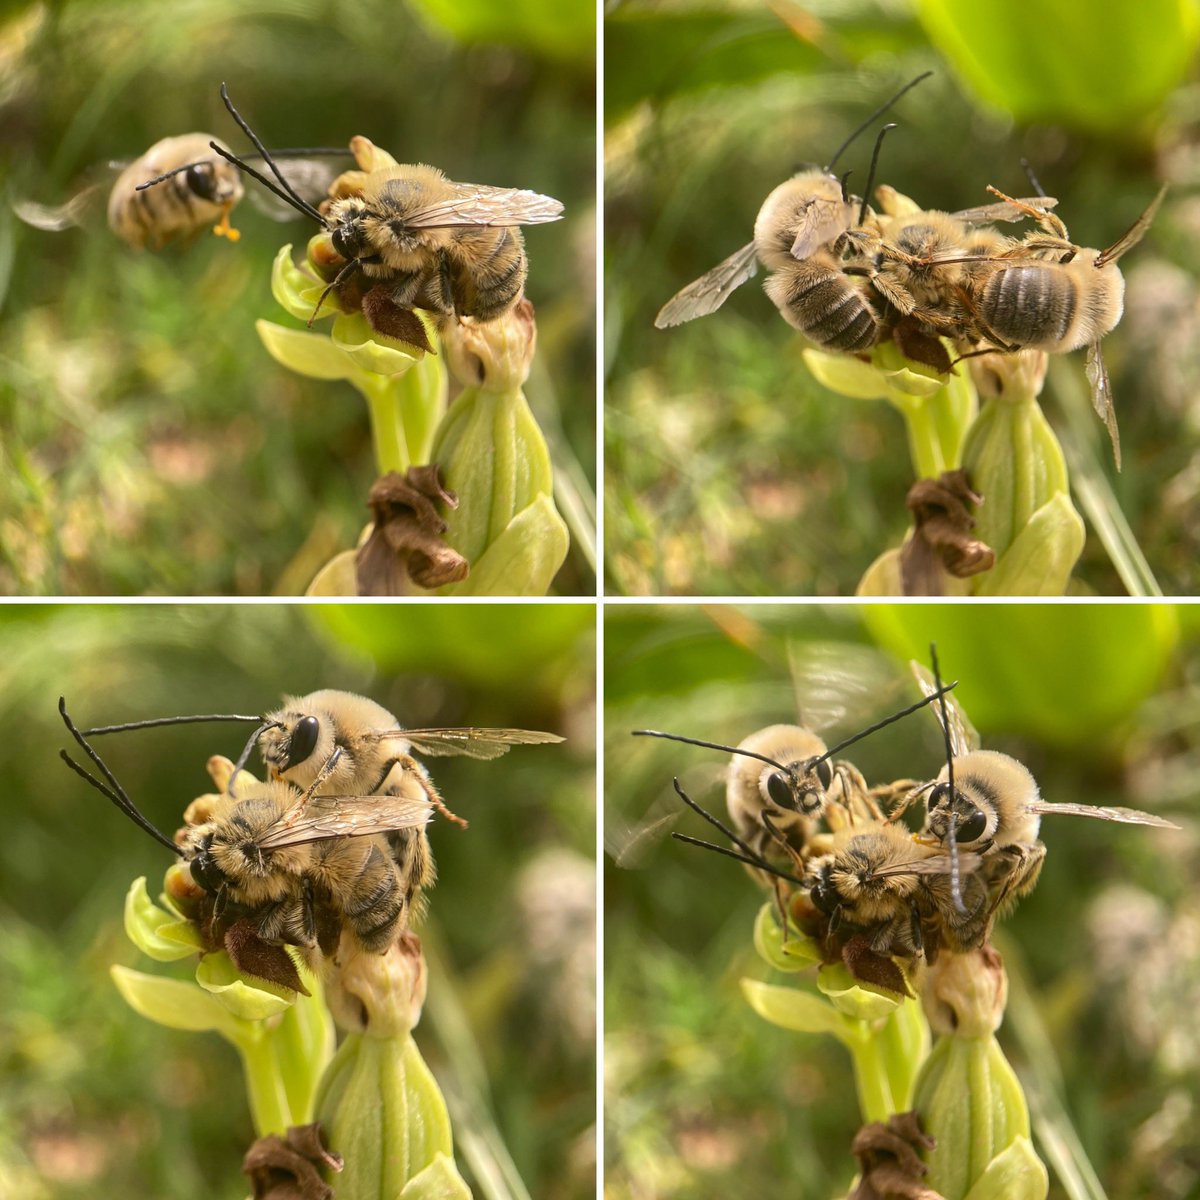 Bee orgy ! Bees (Eucera sp.) engaging in pseudocopulation with a Bumblebee Orchid (Ophrys bombyliflora), showing the successful pollination strategy of the orchid (one of the bees already has pollinia attached). Three bees compete to ‘mate’ with the orchid flower. #orchid